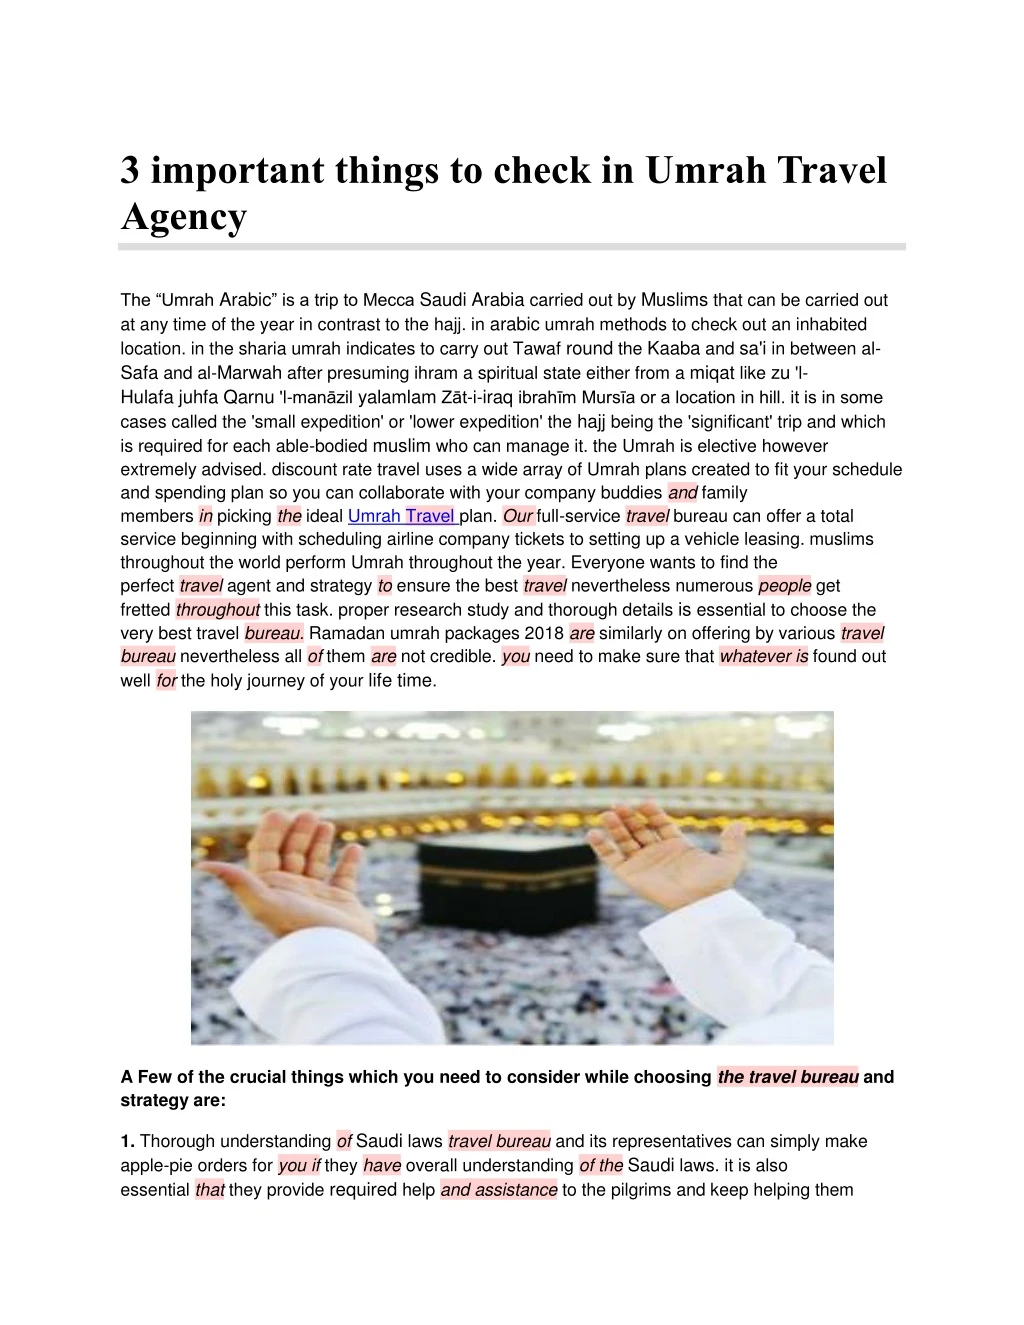 3 important things to check in umrah travel agency